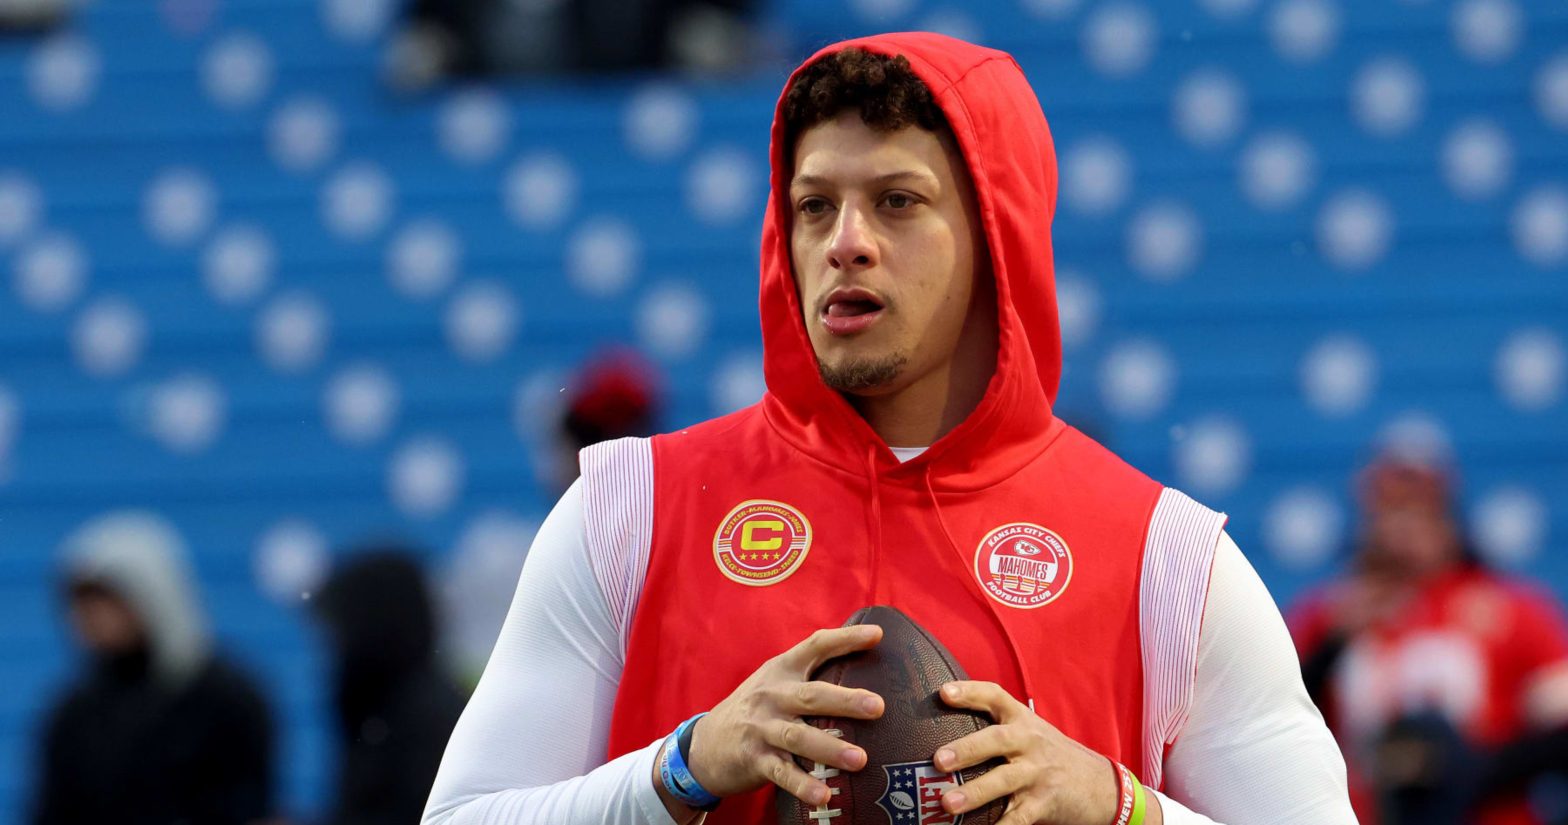 Patrick Mahomes Trolls Bills’ Dion Dawkins with IG Photo After Chiefs’ Playoff Win